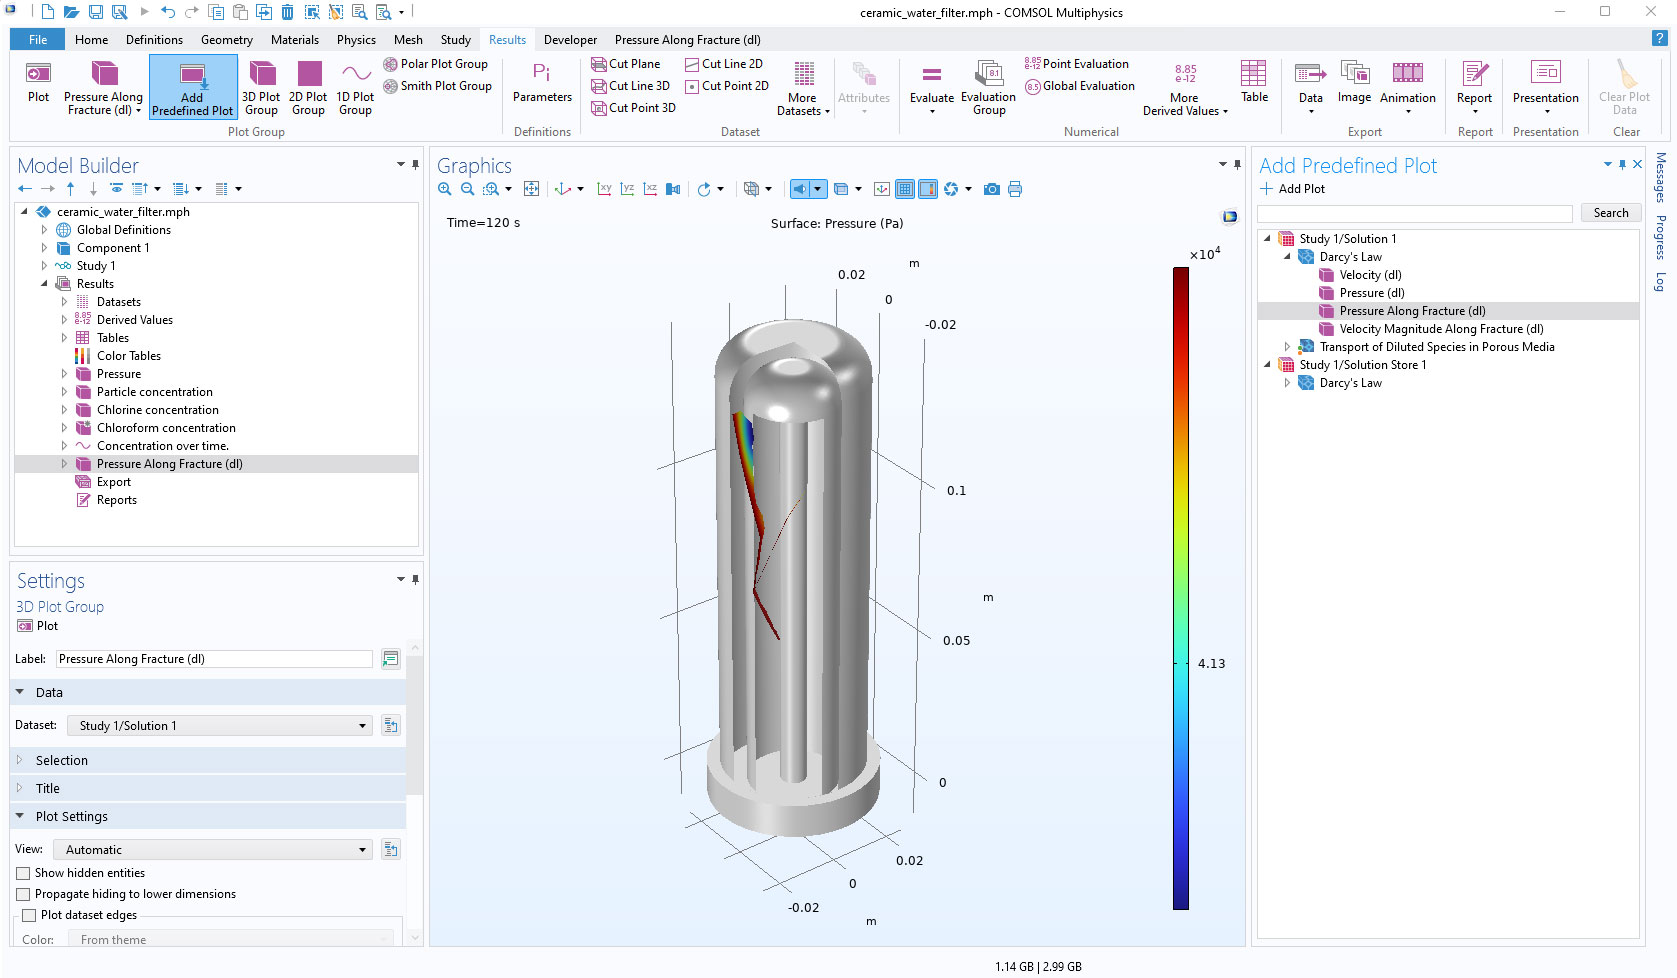 The COMSOL Multiphysics UI showing the Model Builder window with the Pressure Along Fracture plot selected, the water filter model in the Graphics window, and the Add Predefined Plot window.